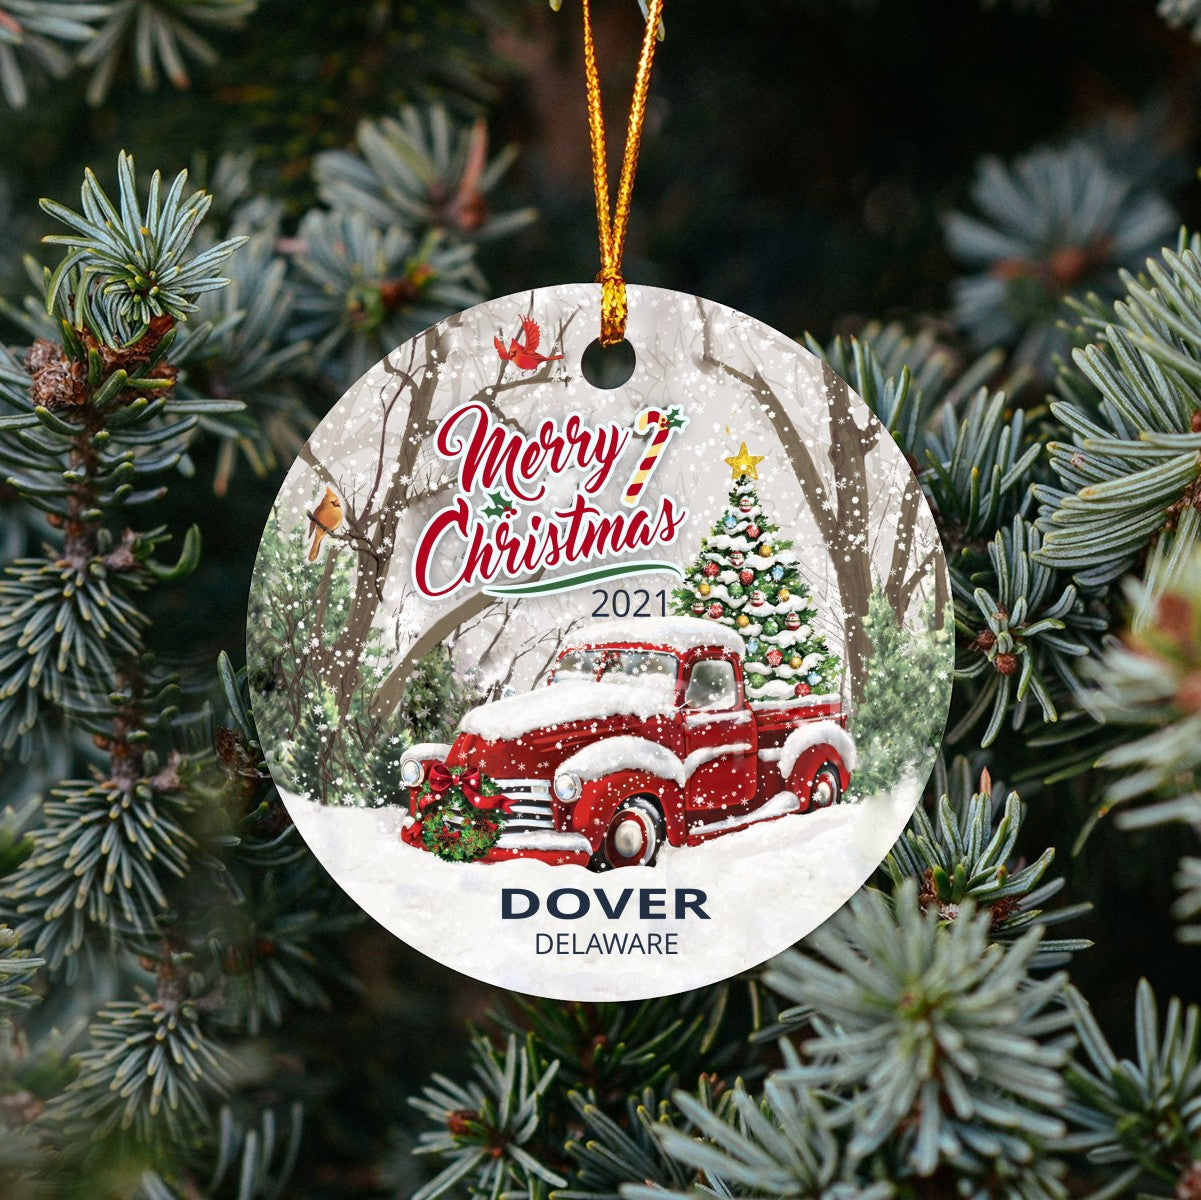 Christmas Tree Ornaments Dover - Ornament Customize With Name City And State Dover Delaware DE - Red Truck Xmas Ornaments 3'' Plastic Gift For Family, Friend And Housewarming